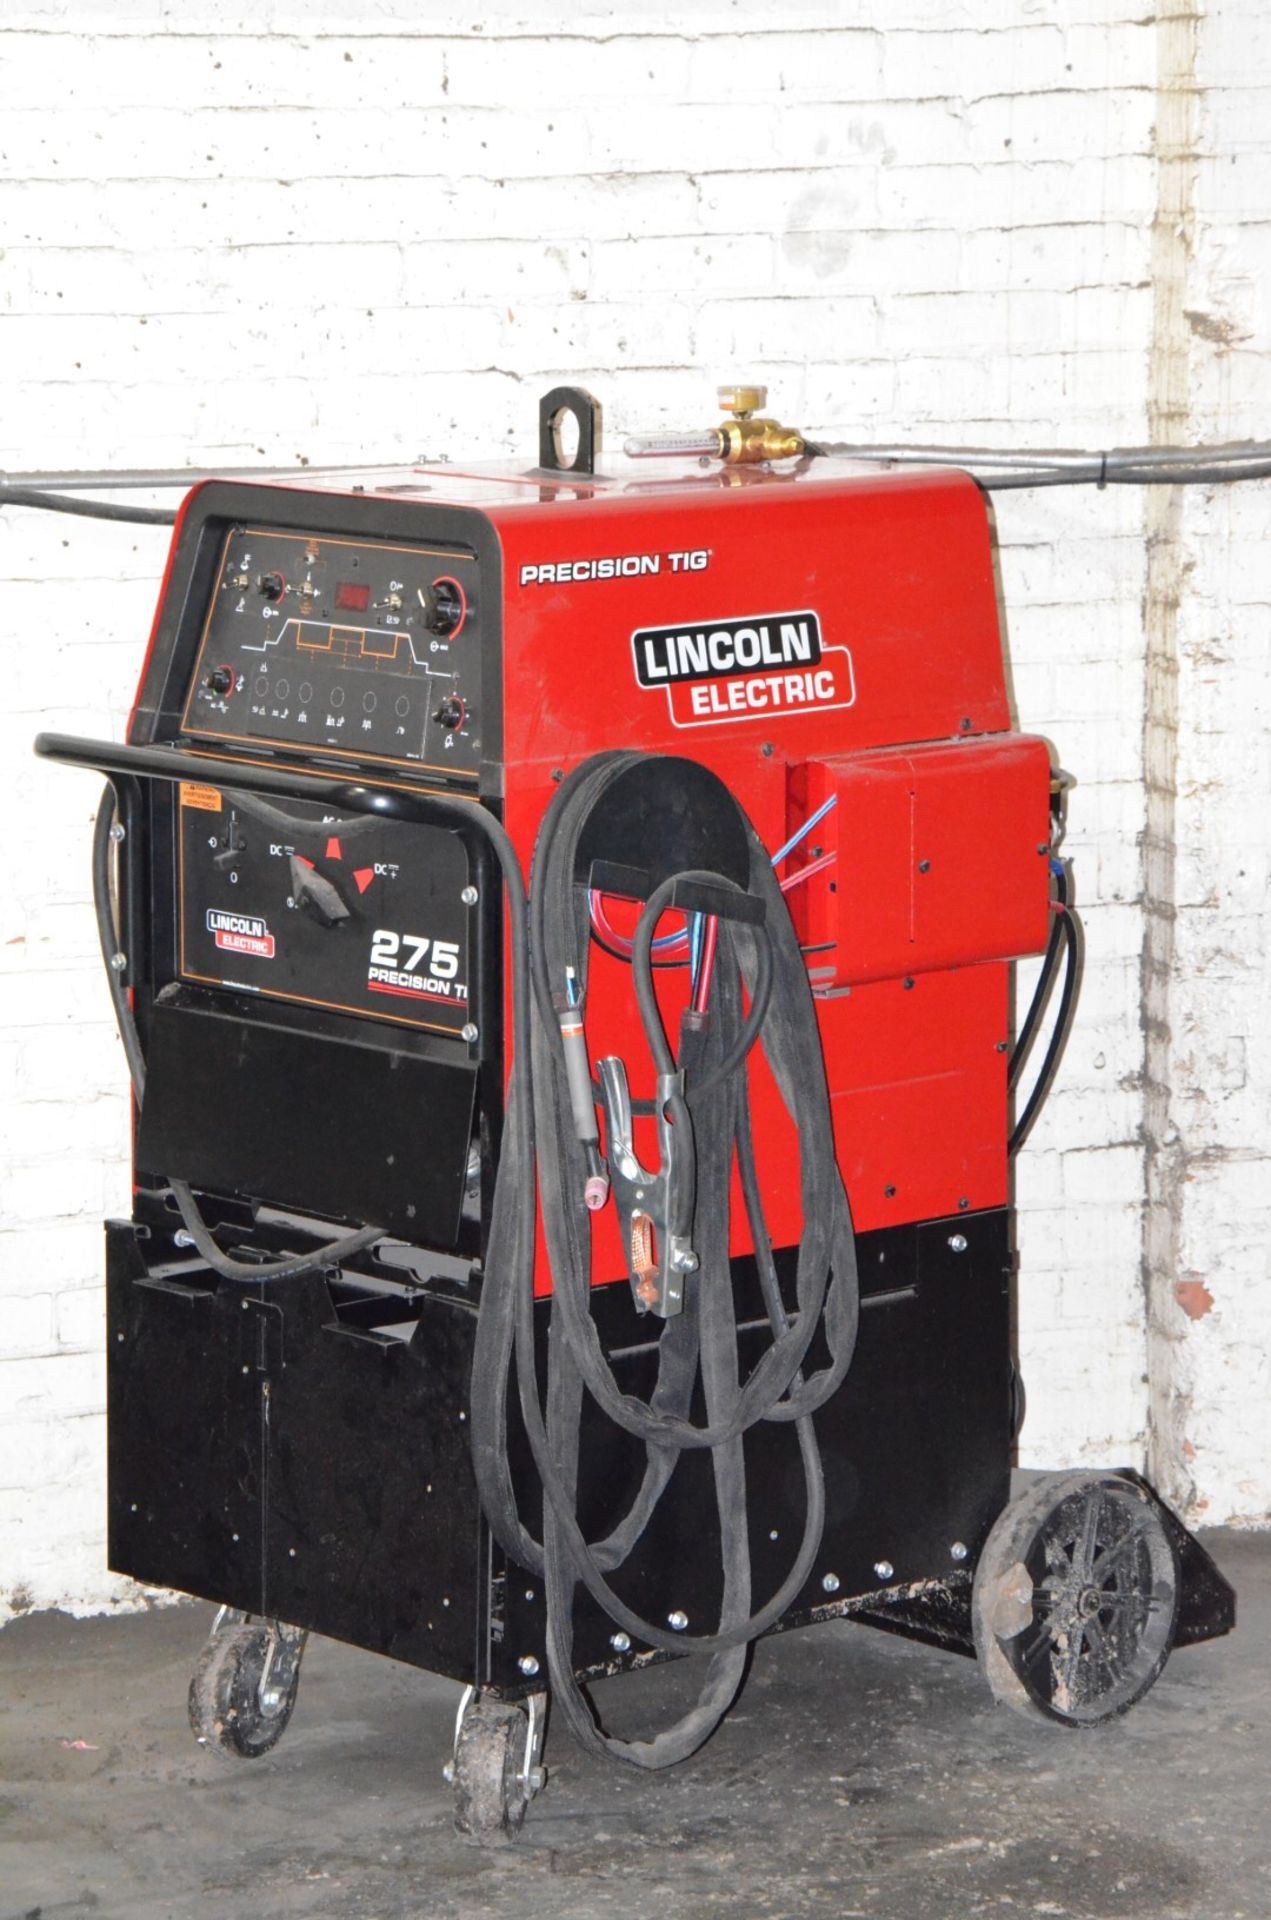 LINCOLN (2022) PRECISION TIG 275 DIGITAL PORTABLE TIG WELDER WITH TORCH, CABLES AND GUN, S/N